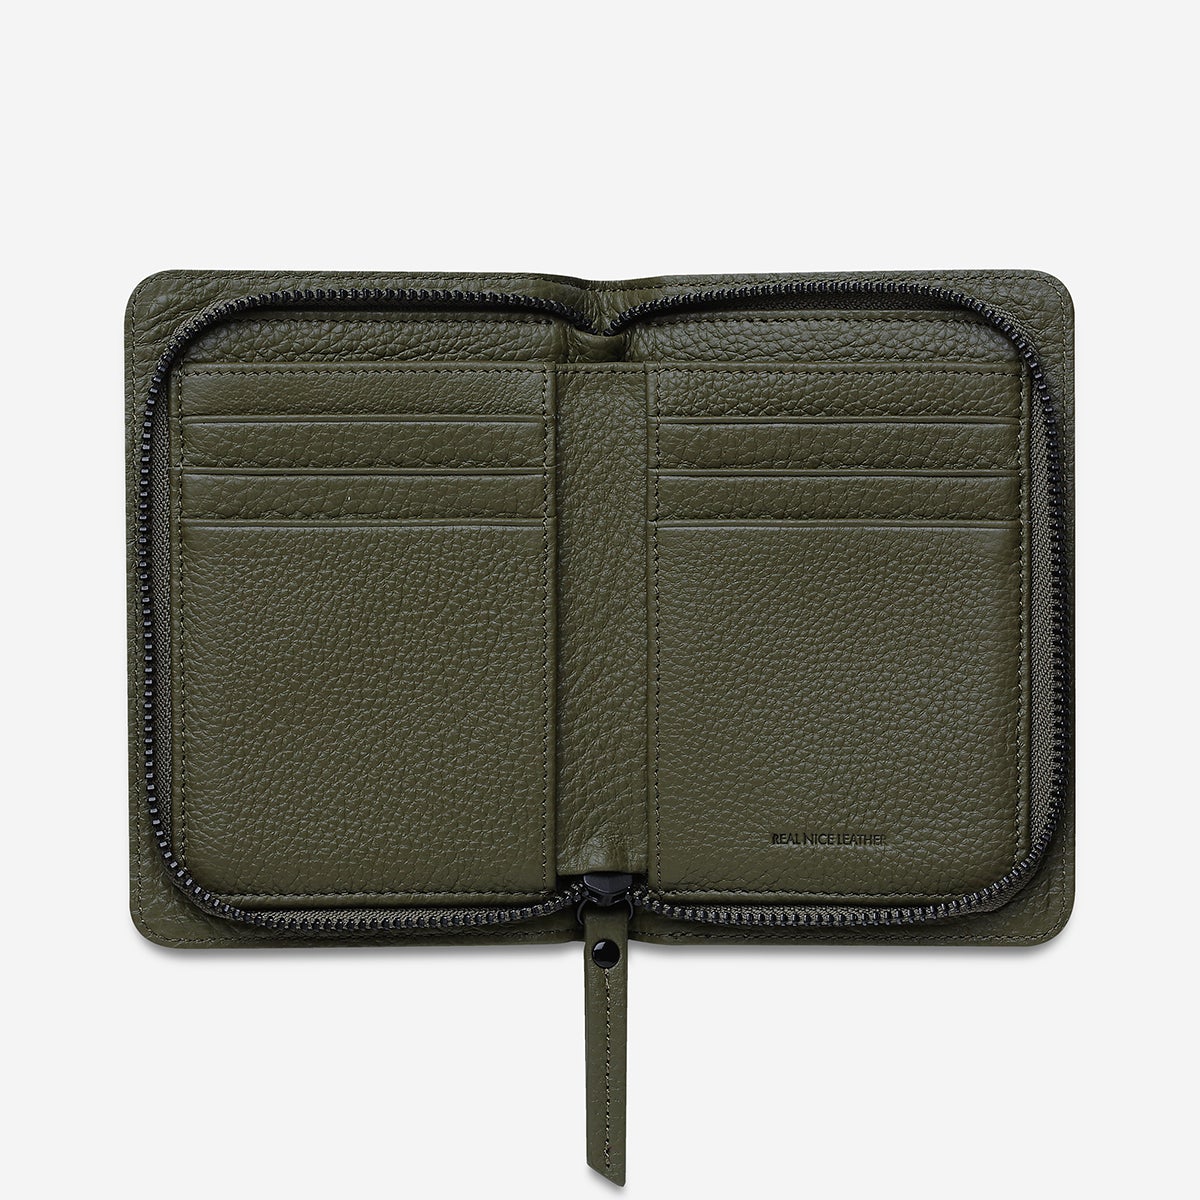 Status Anxiety Popular Problems Wallet in Khaki Inside View